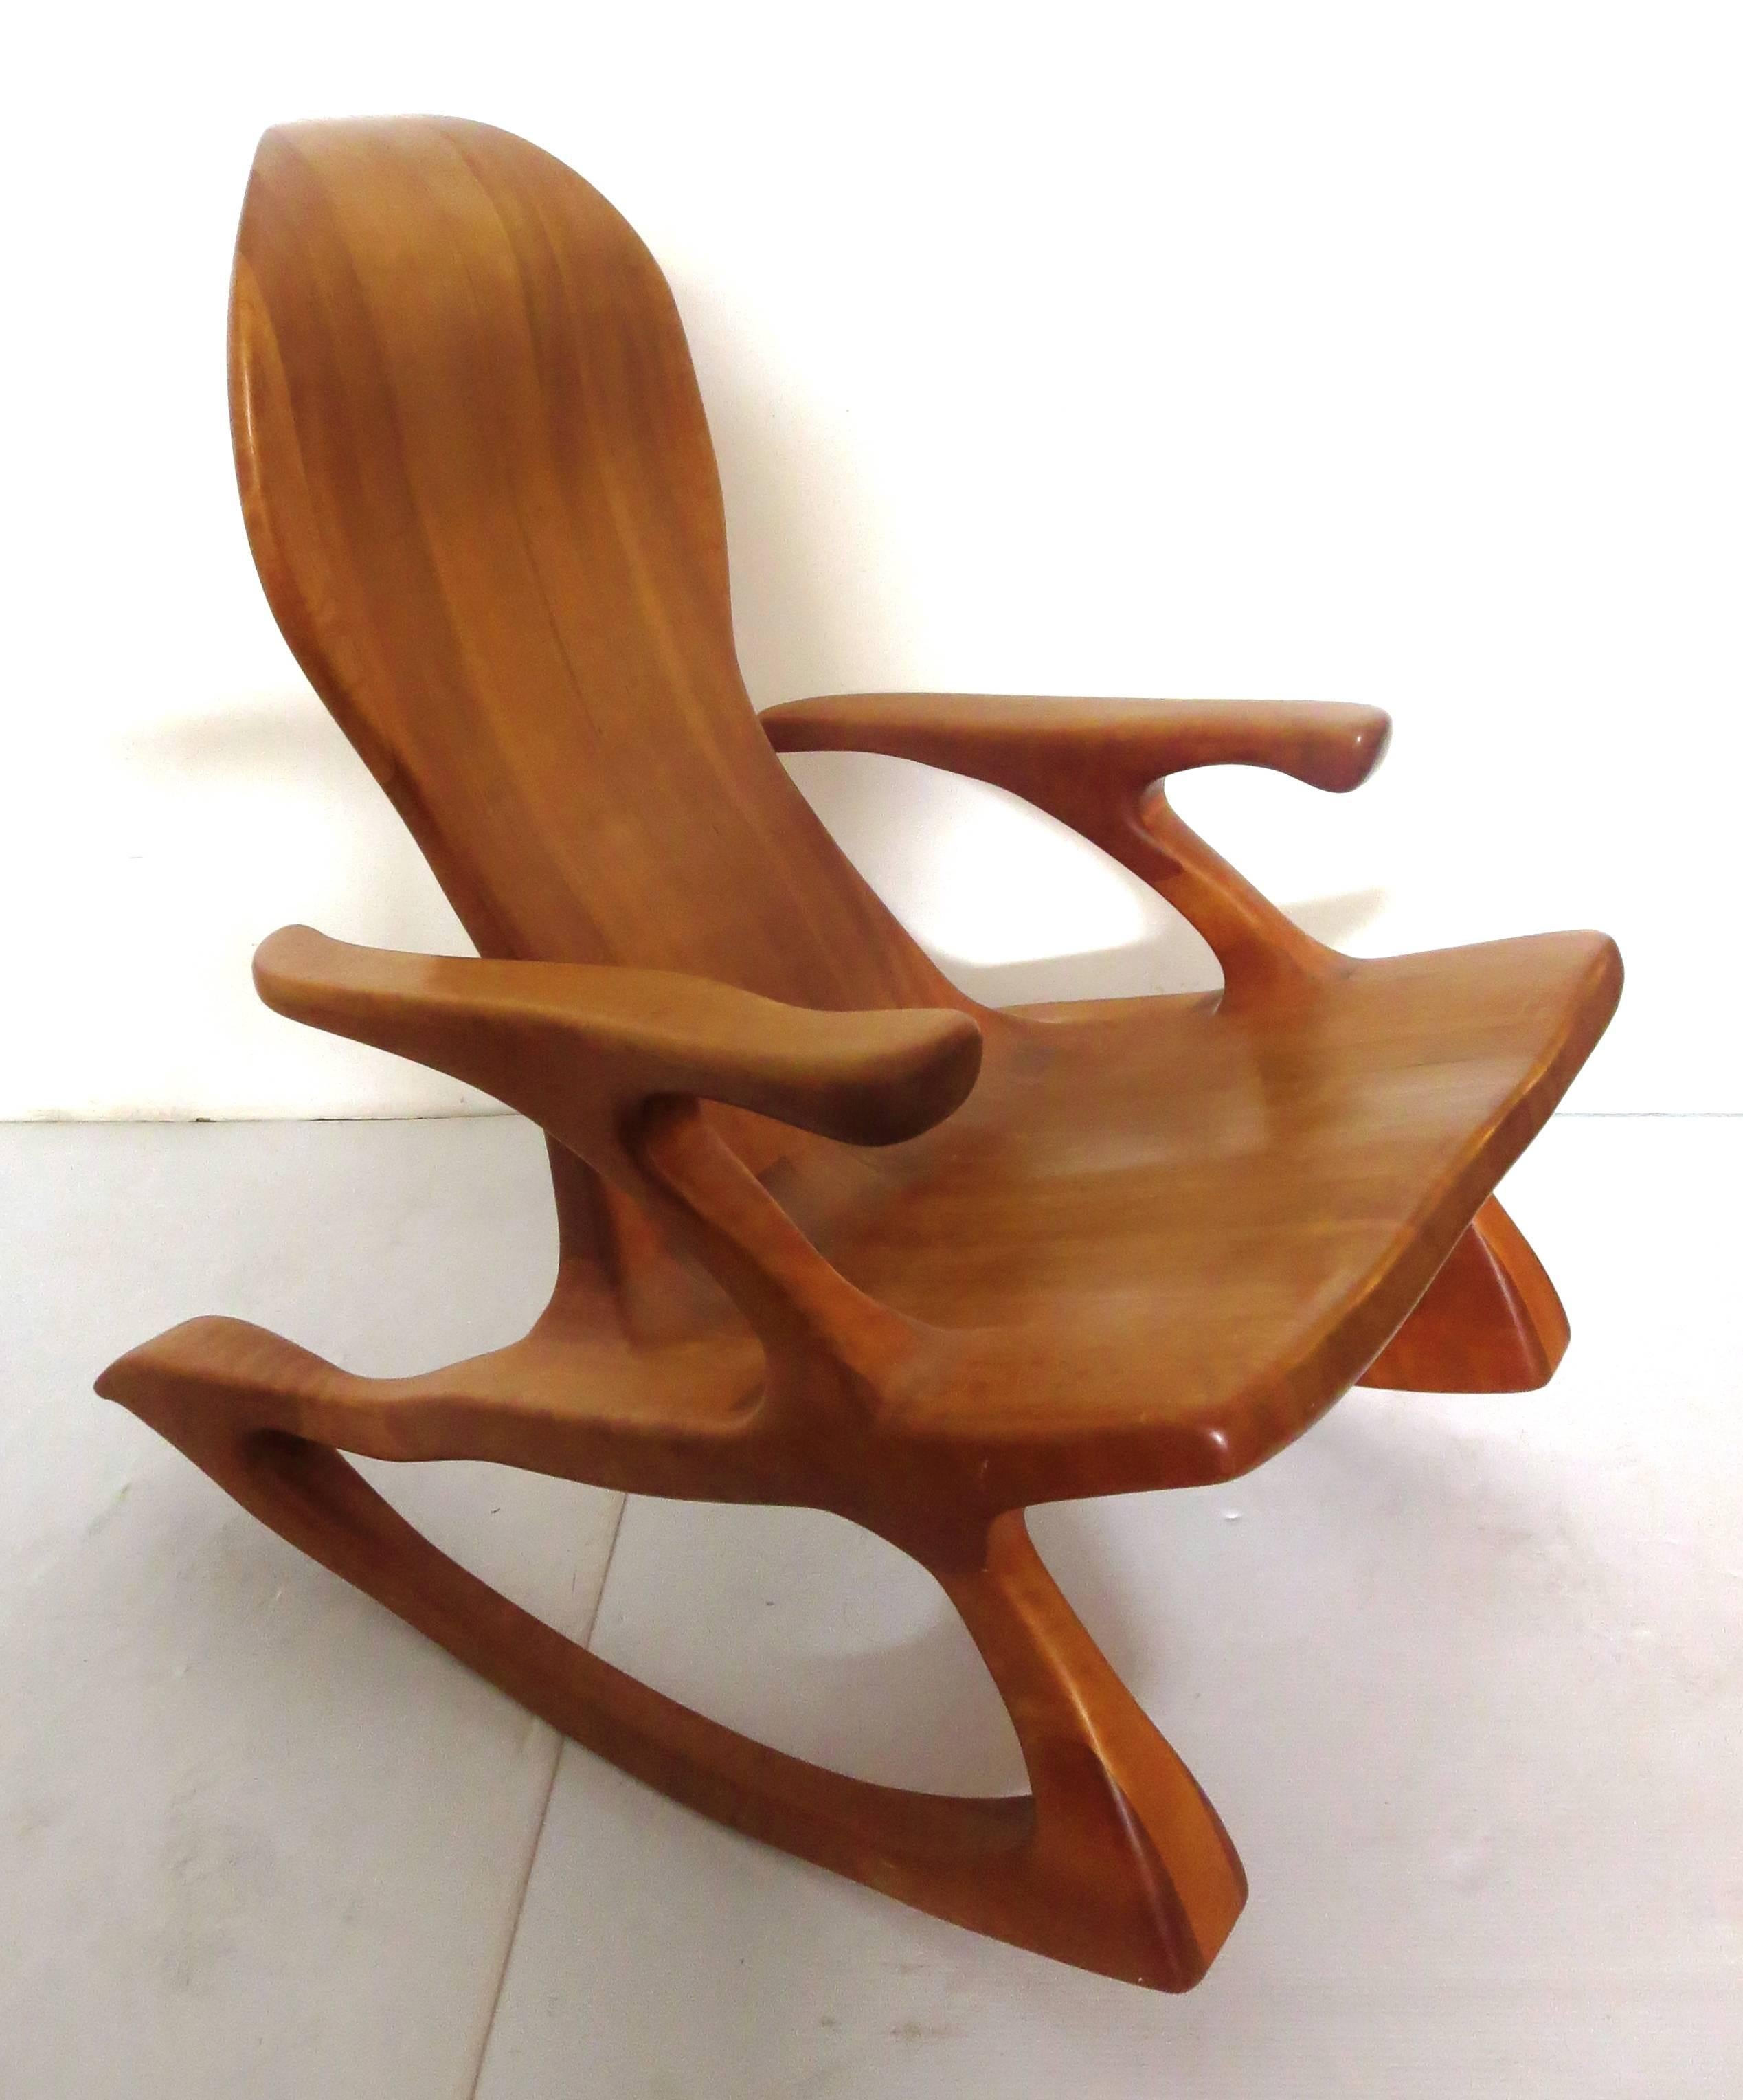 Striking American modern one piece solid cherrywood handcrafted rocker, made by Texas craftsman  by Kevin DesPlanques , incredible piece well made solid sturdy and comfy.